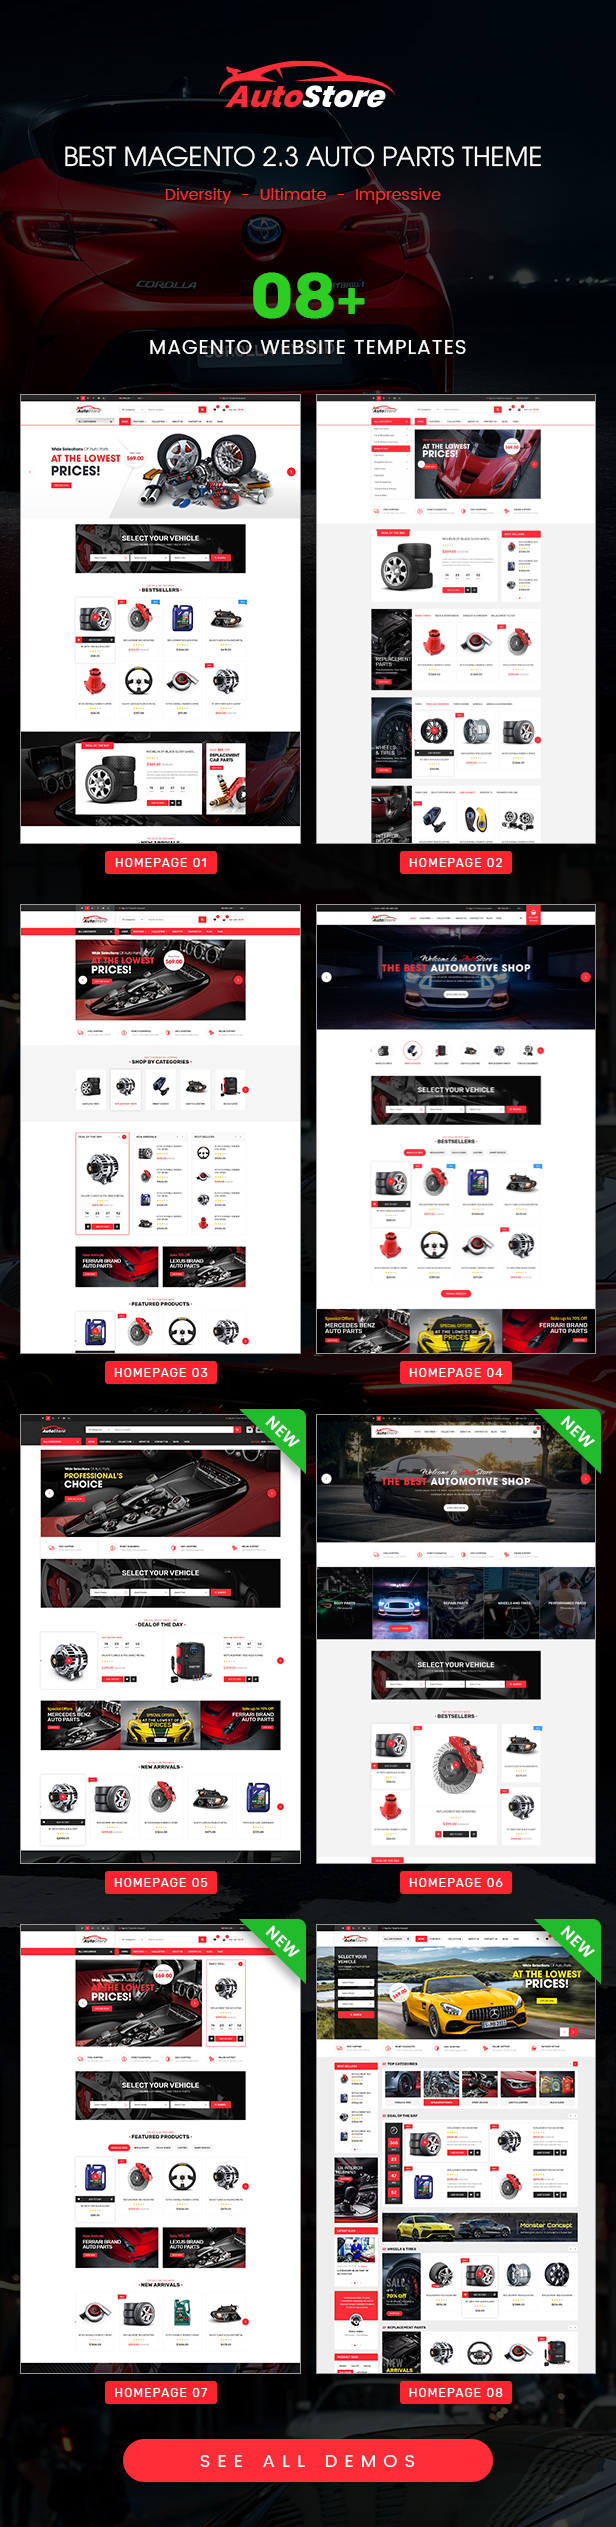 AutoStore - Auto Parts and Equipments Magento 2 Theme with Ajax Attributes Search Module - 3